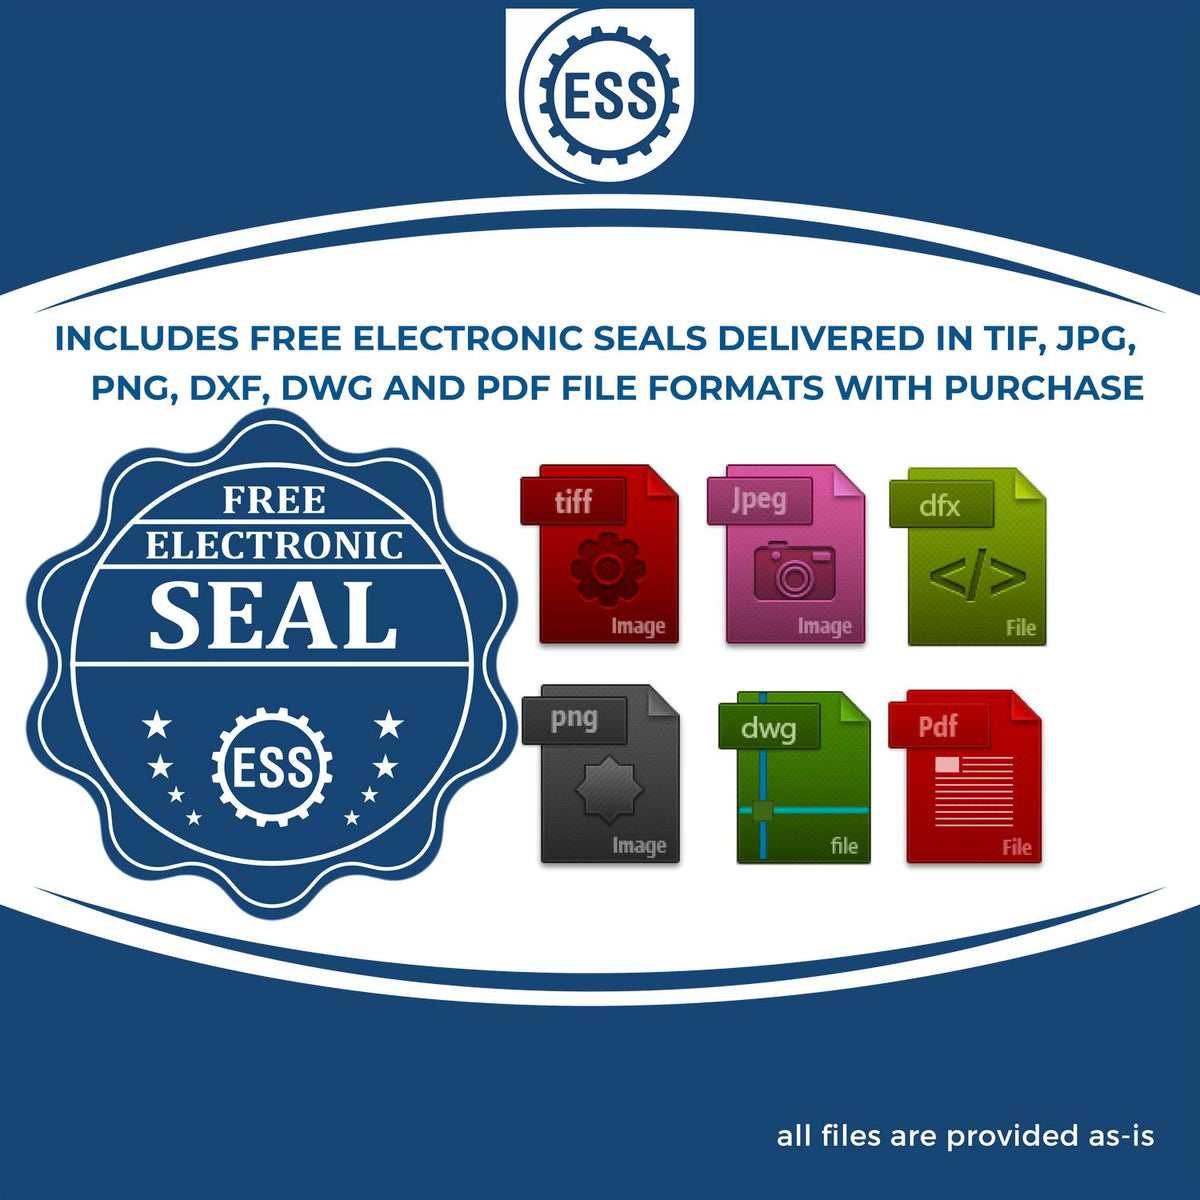 An infographic for the free electronic seal for the Hybrid New Mexico Land Surveyor Seal illustrating the different file type icons such as DXF, DWG, TIF, JPG and PNG.